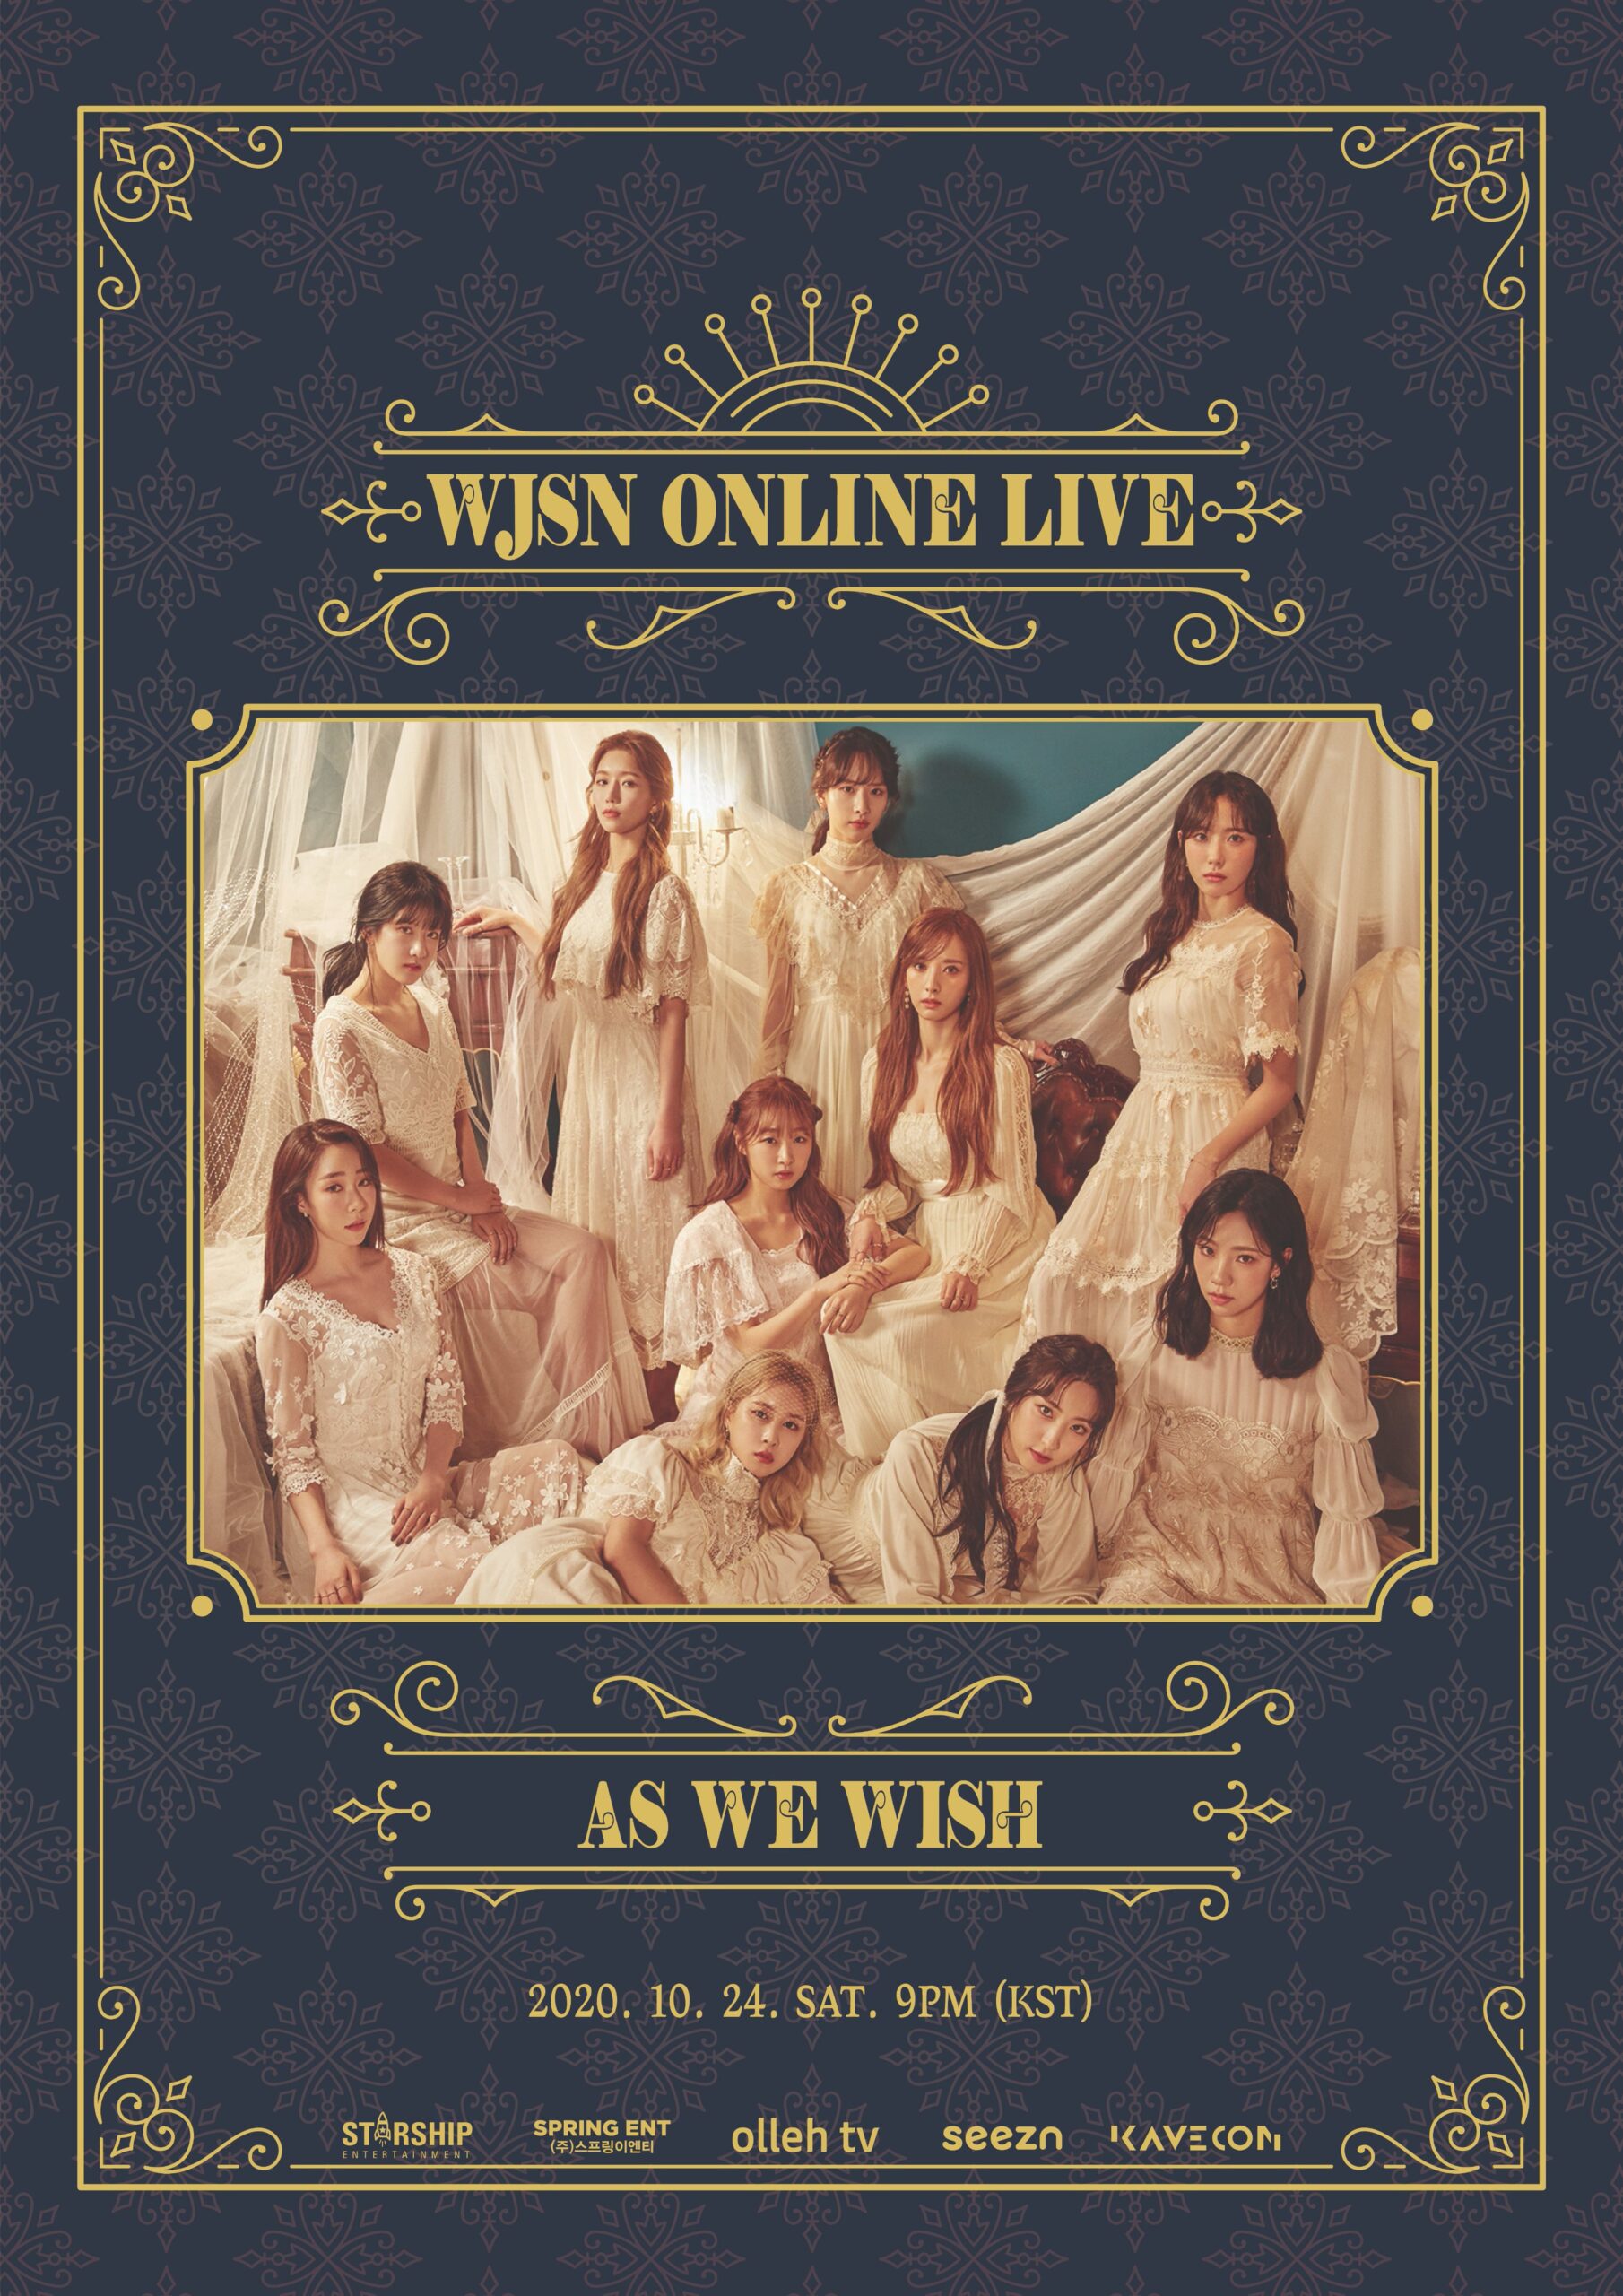 wjsn-to-hold-online-concert-as-we-wish-on-october-24-2